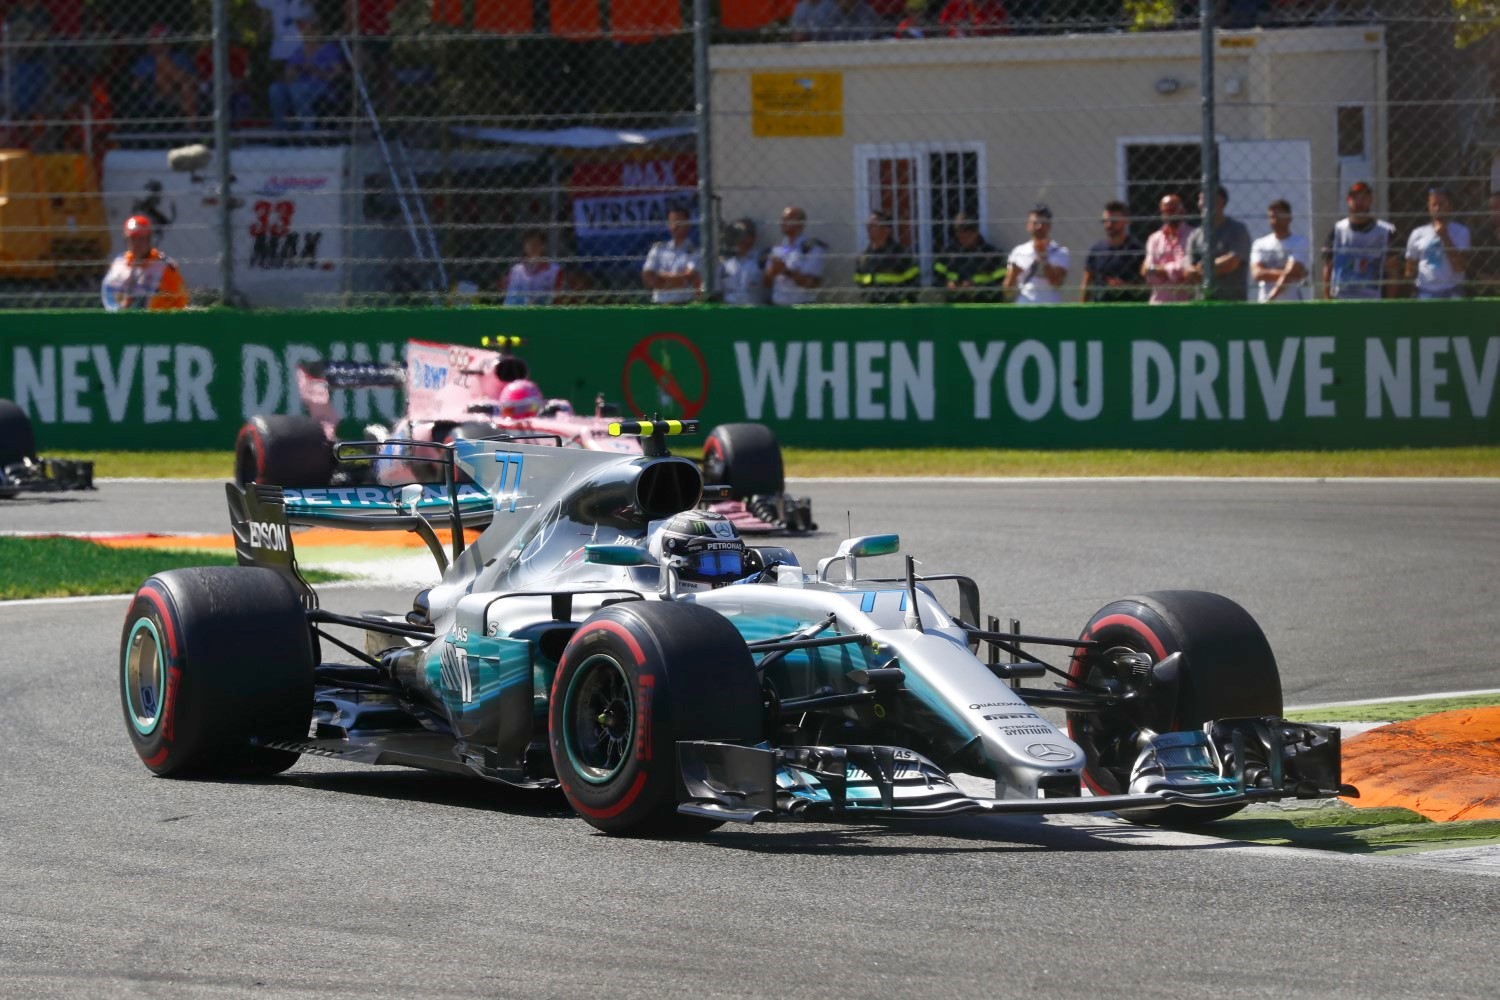 Hamilton would not be winning races or titles in a mid-field car